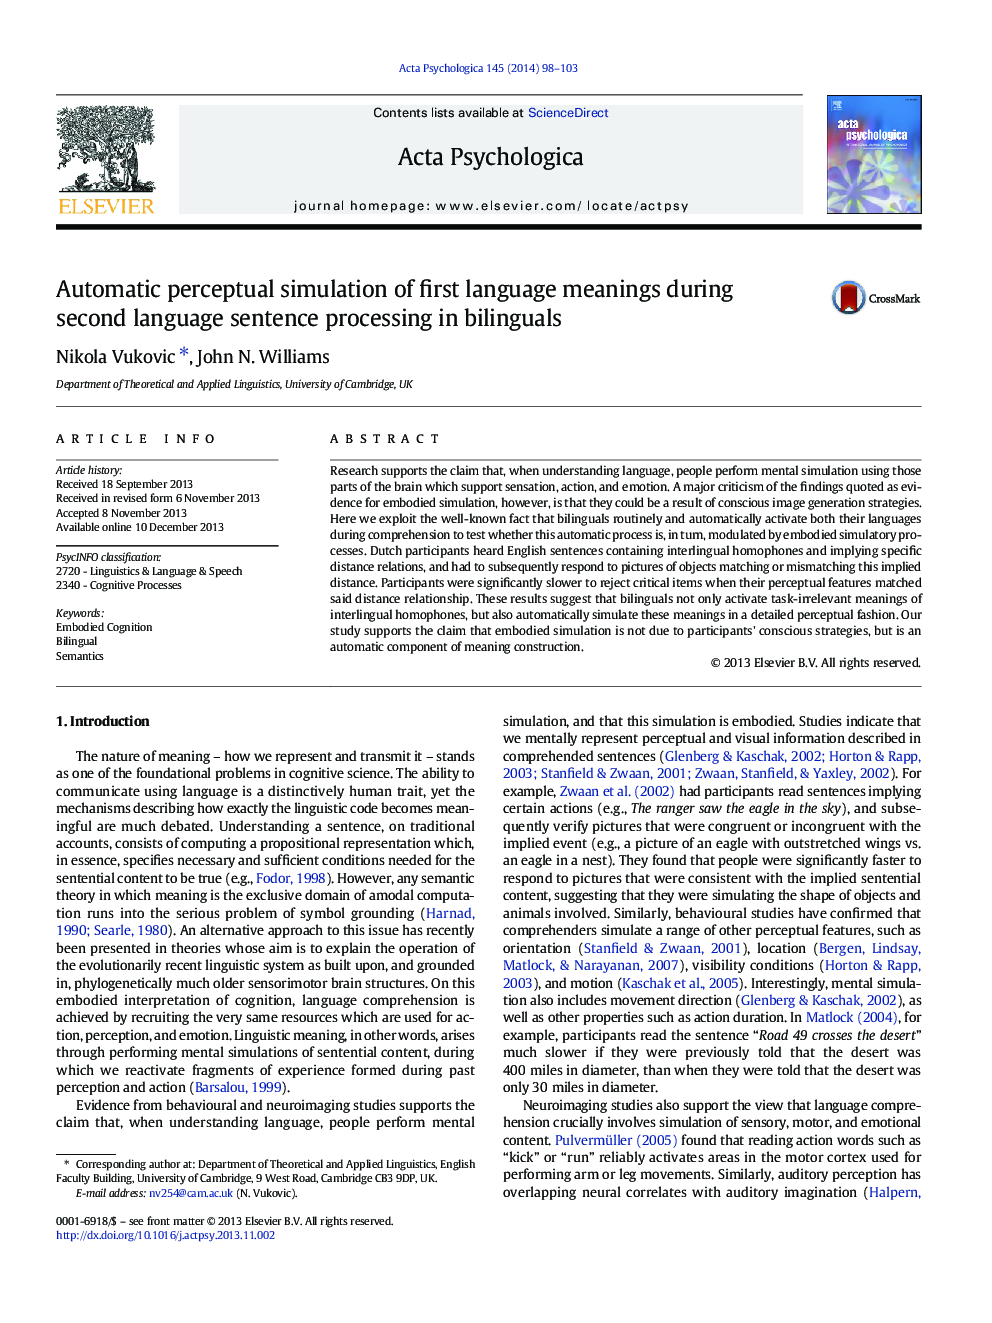 Automatic perceptual simulation of first language meanings during second language sentence processing in bilinguals